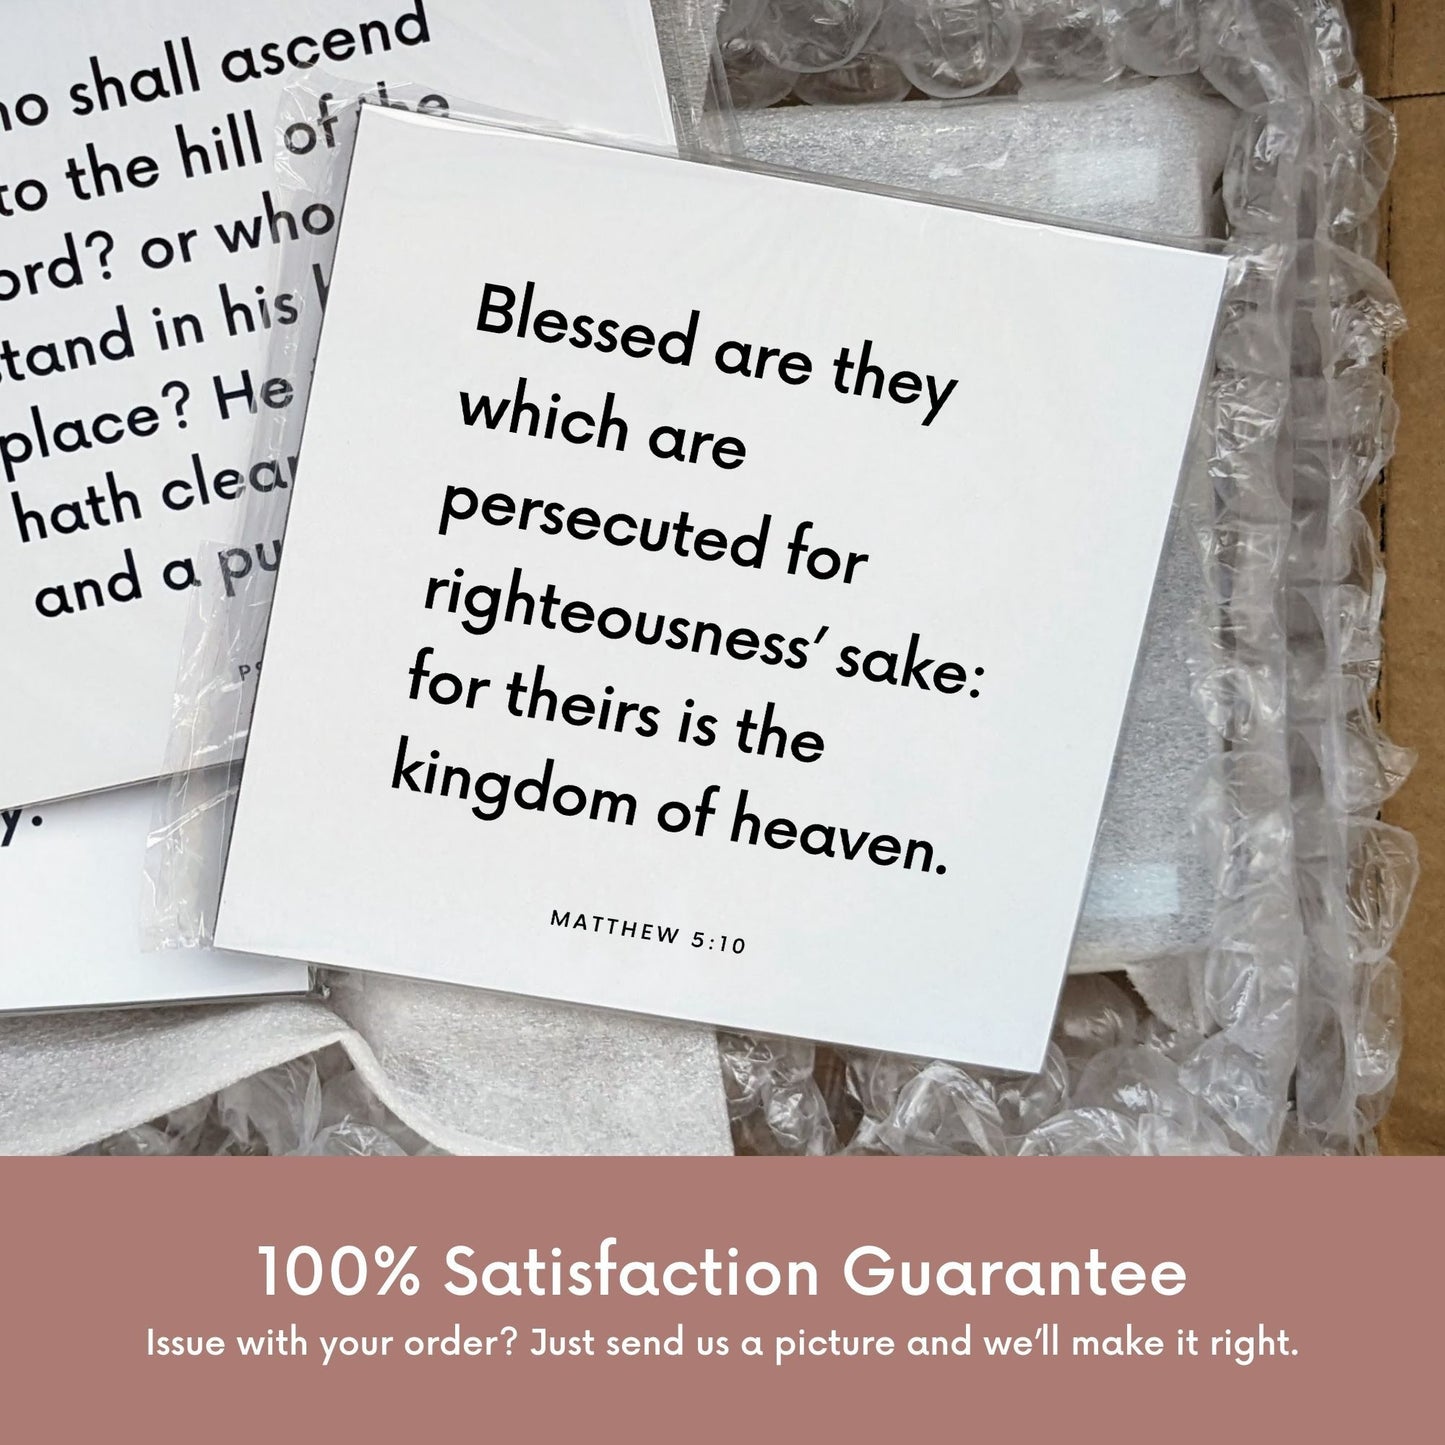 Shipping materials for scripture tile of Matthew 5:10 - "Blessed are they which are persecuted for righteousness"